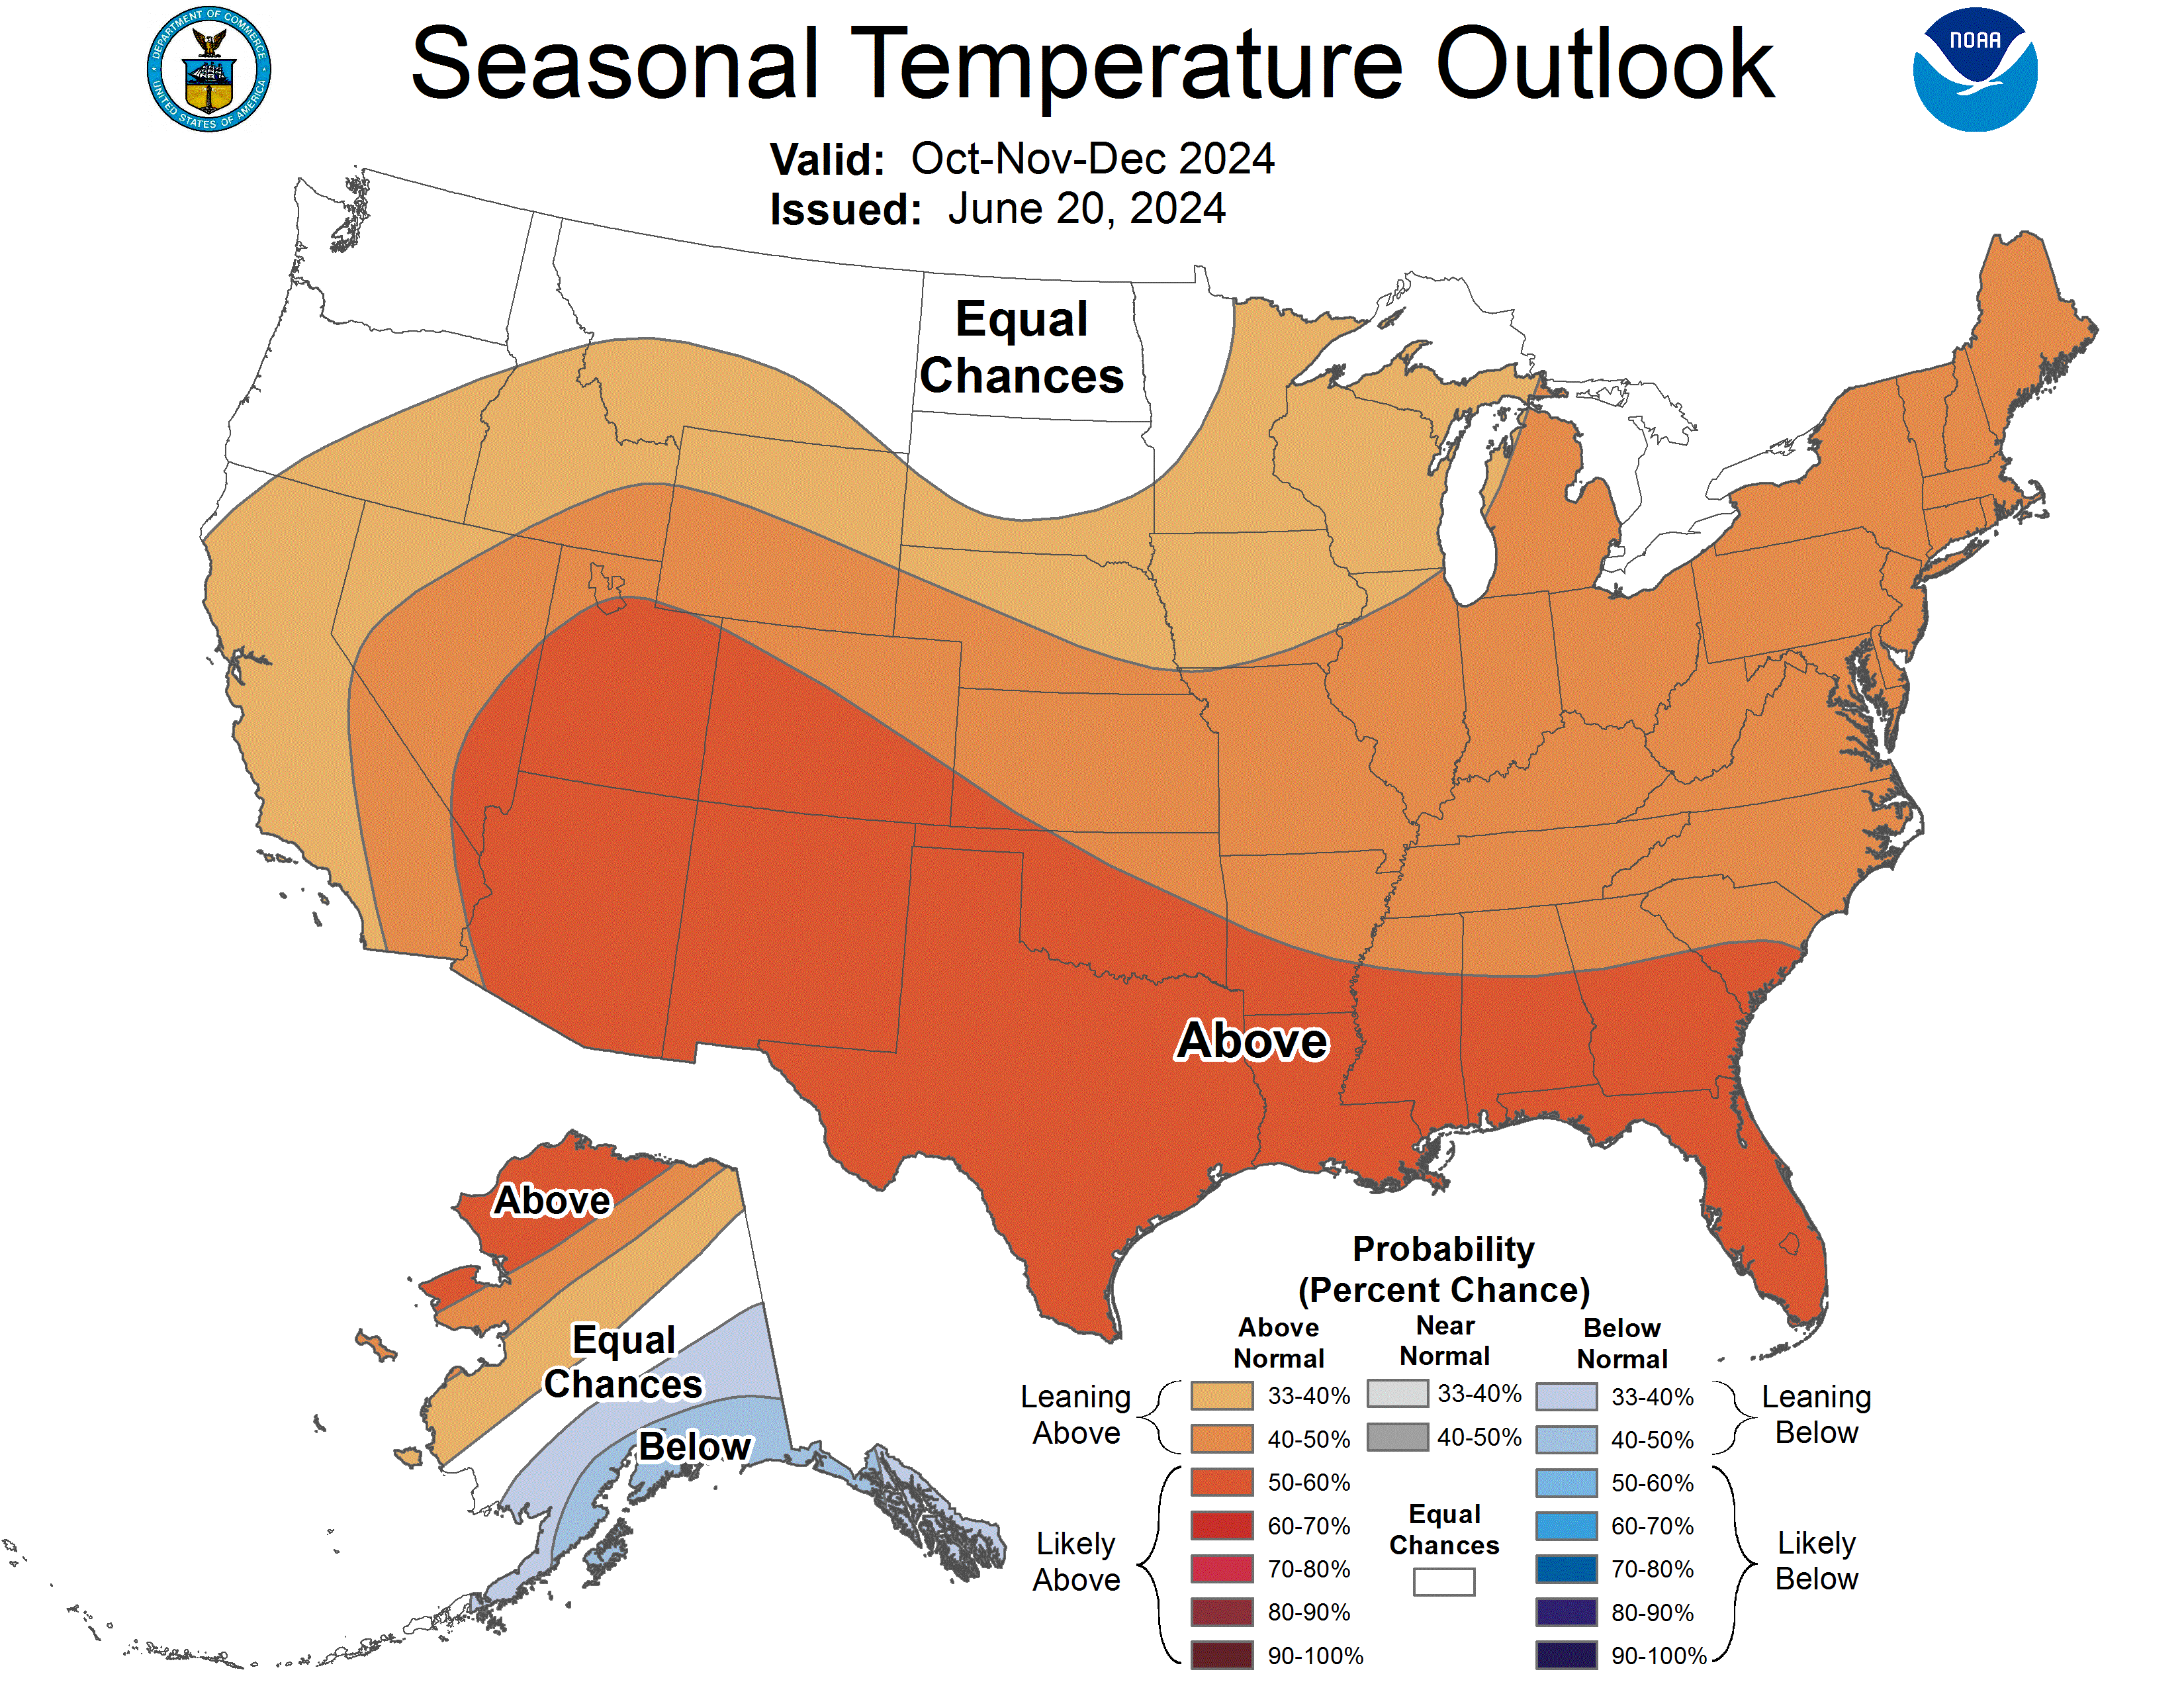 Climate Prediction Center releases their 2022-2023 winter outlook